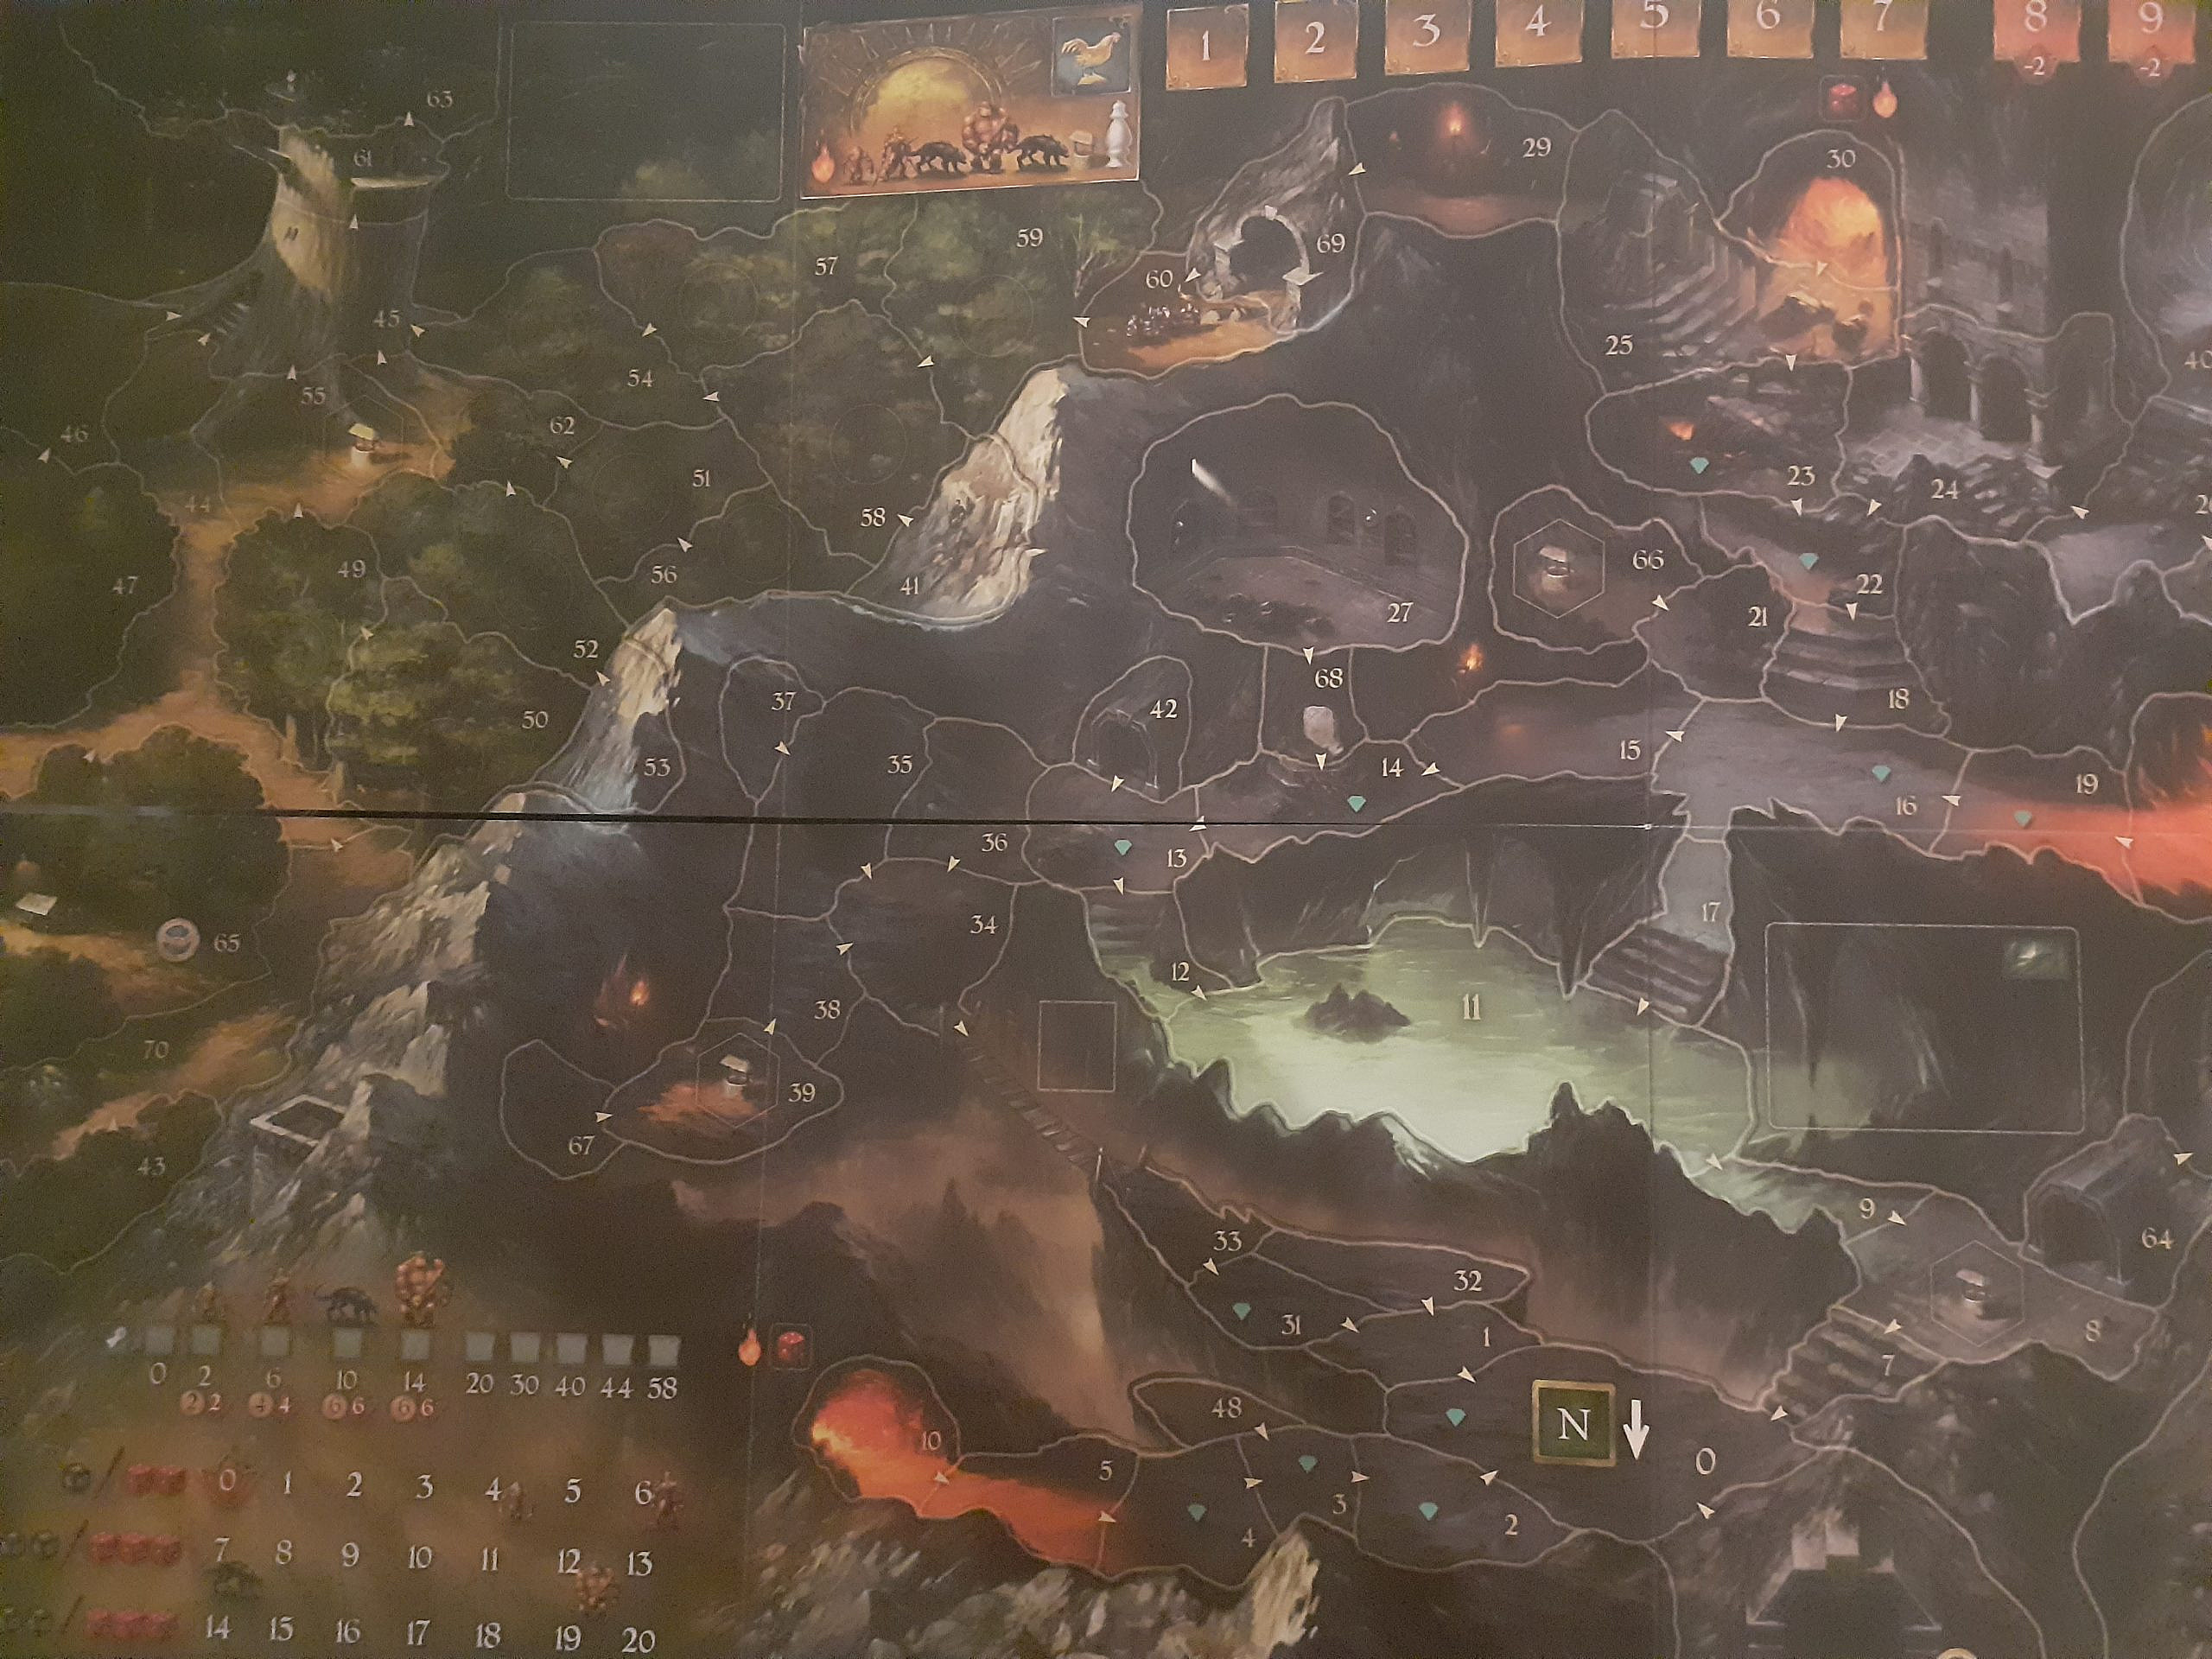 A map in a boardgame called Legends of Andor